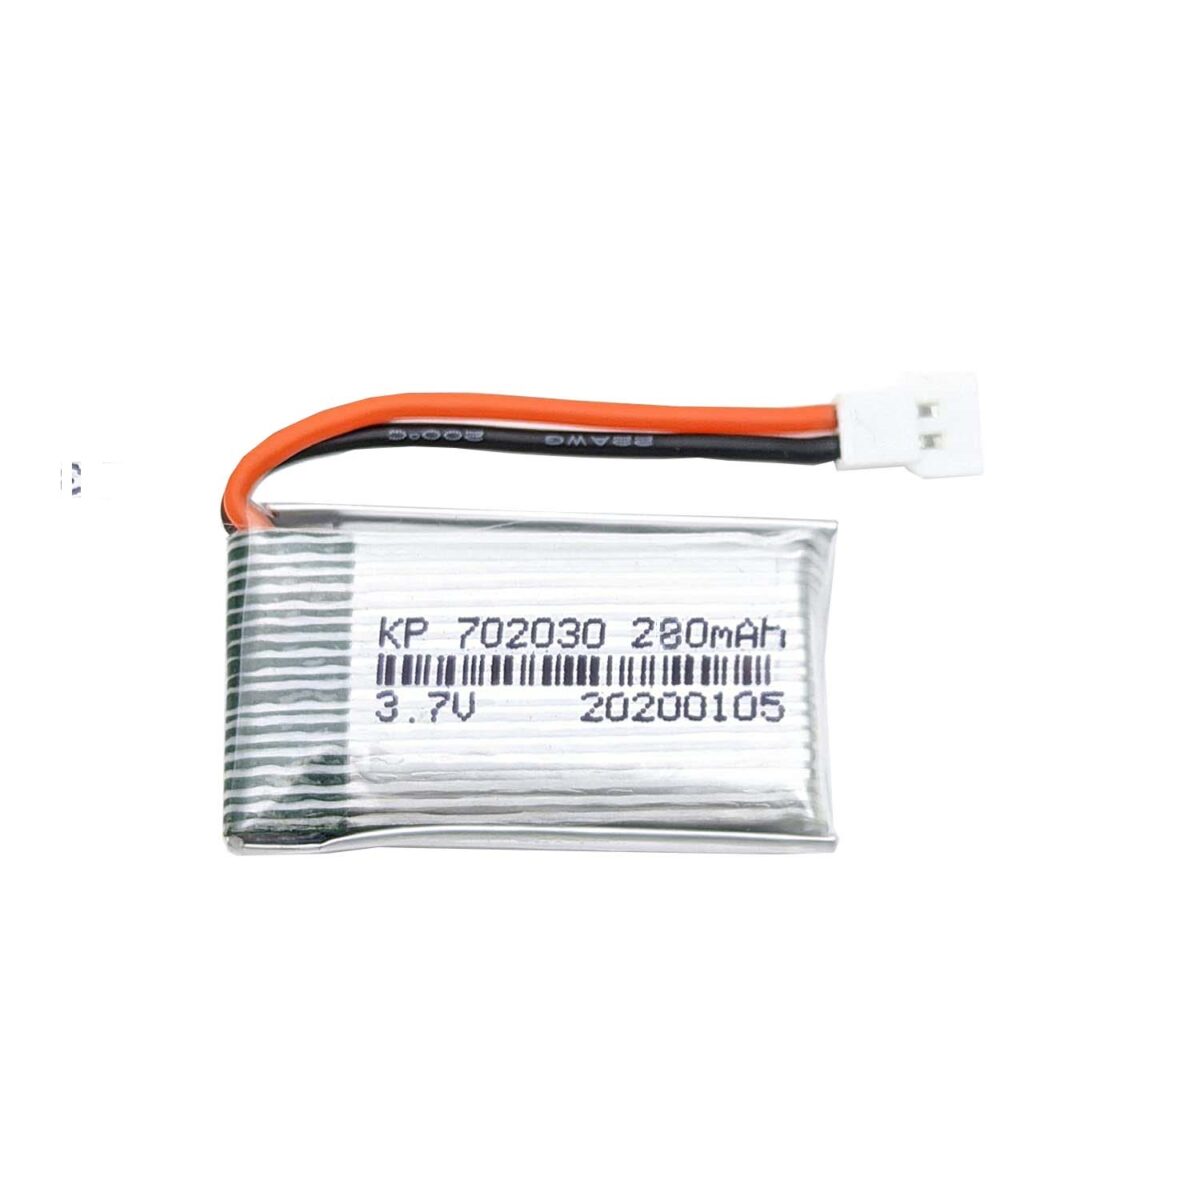 Lipo Rechargeable Battery-3.7V/280mAH-Model KP-702030-For RC Drone